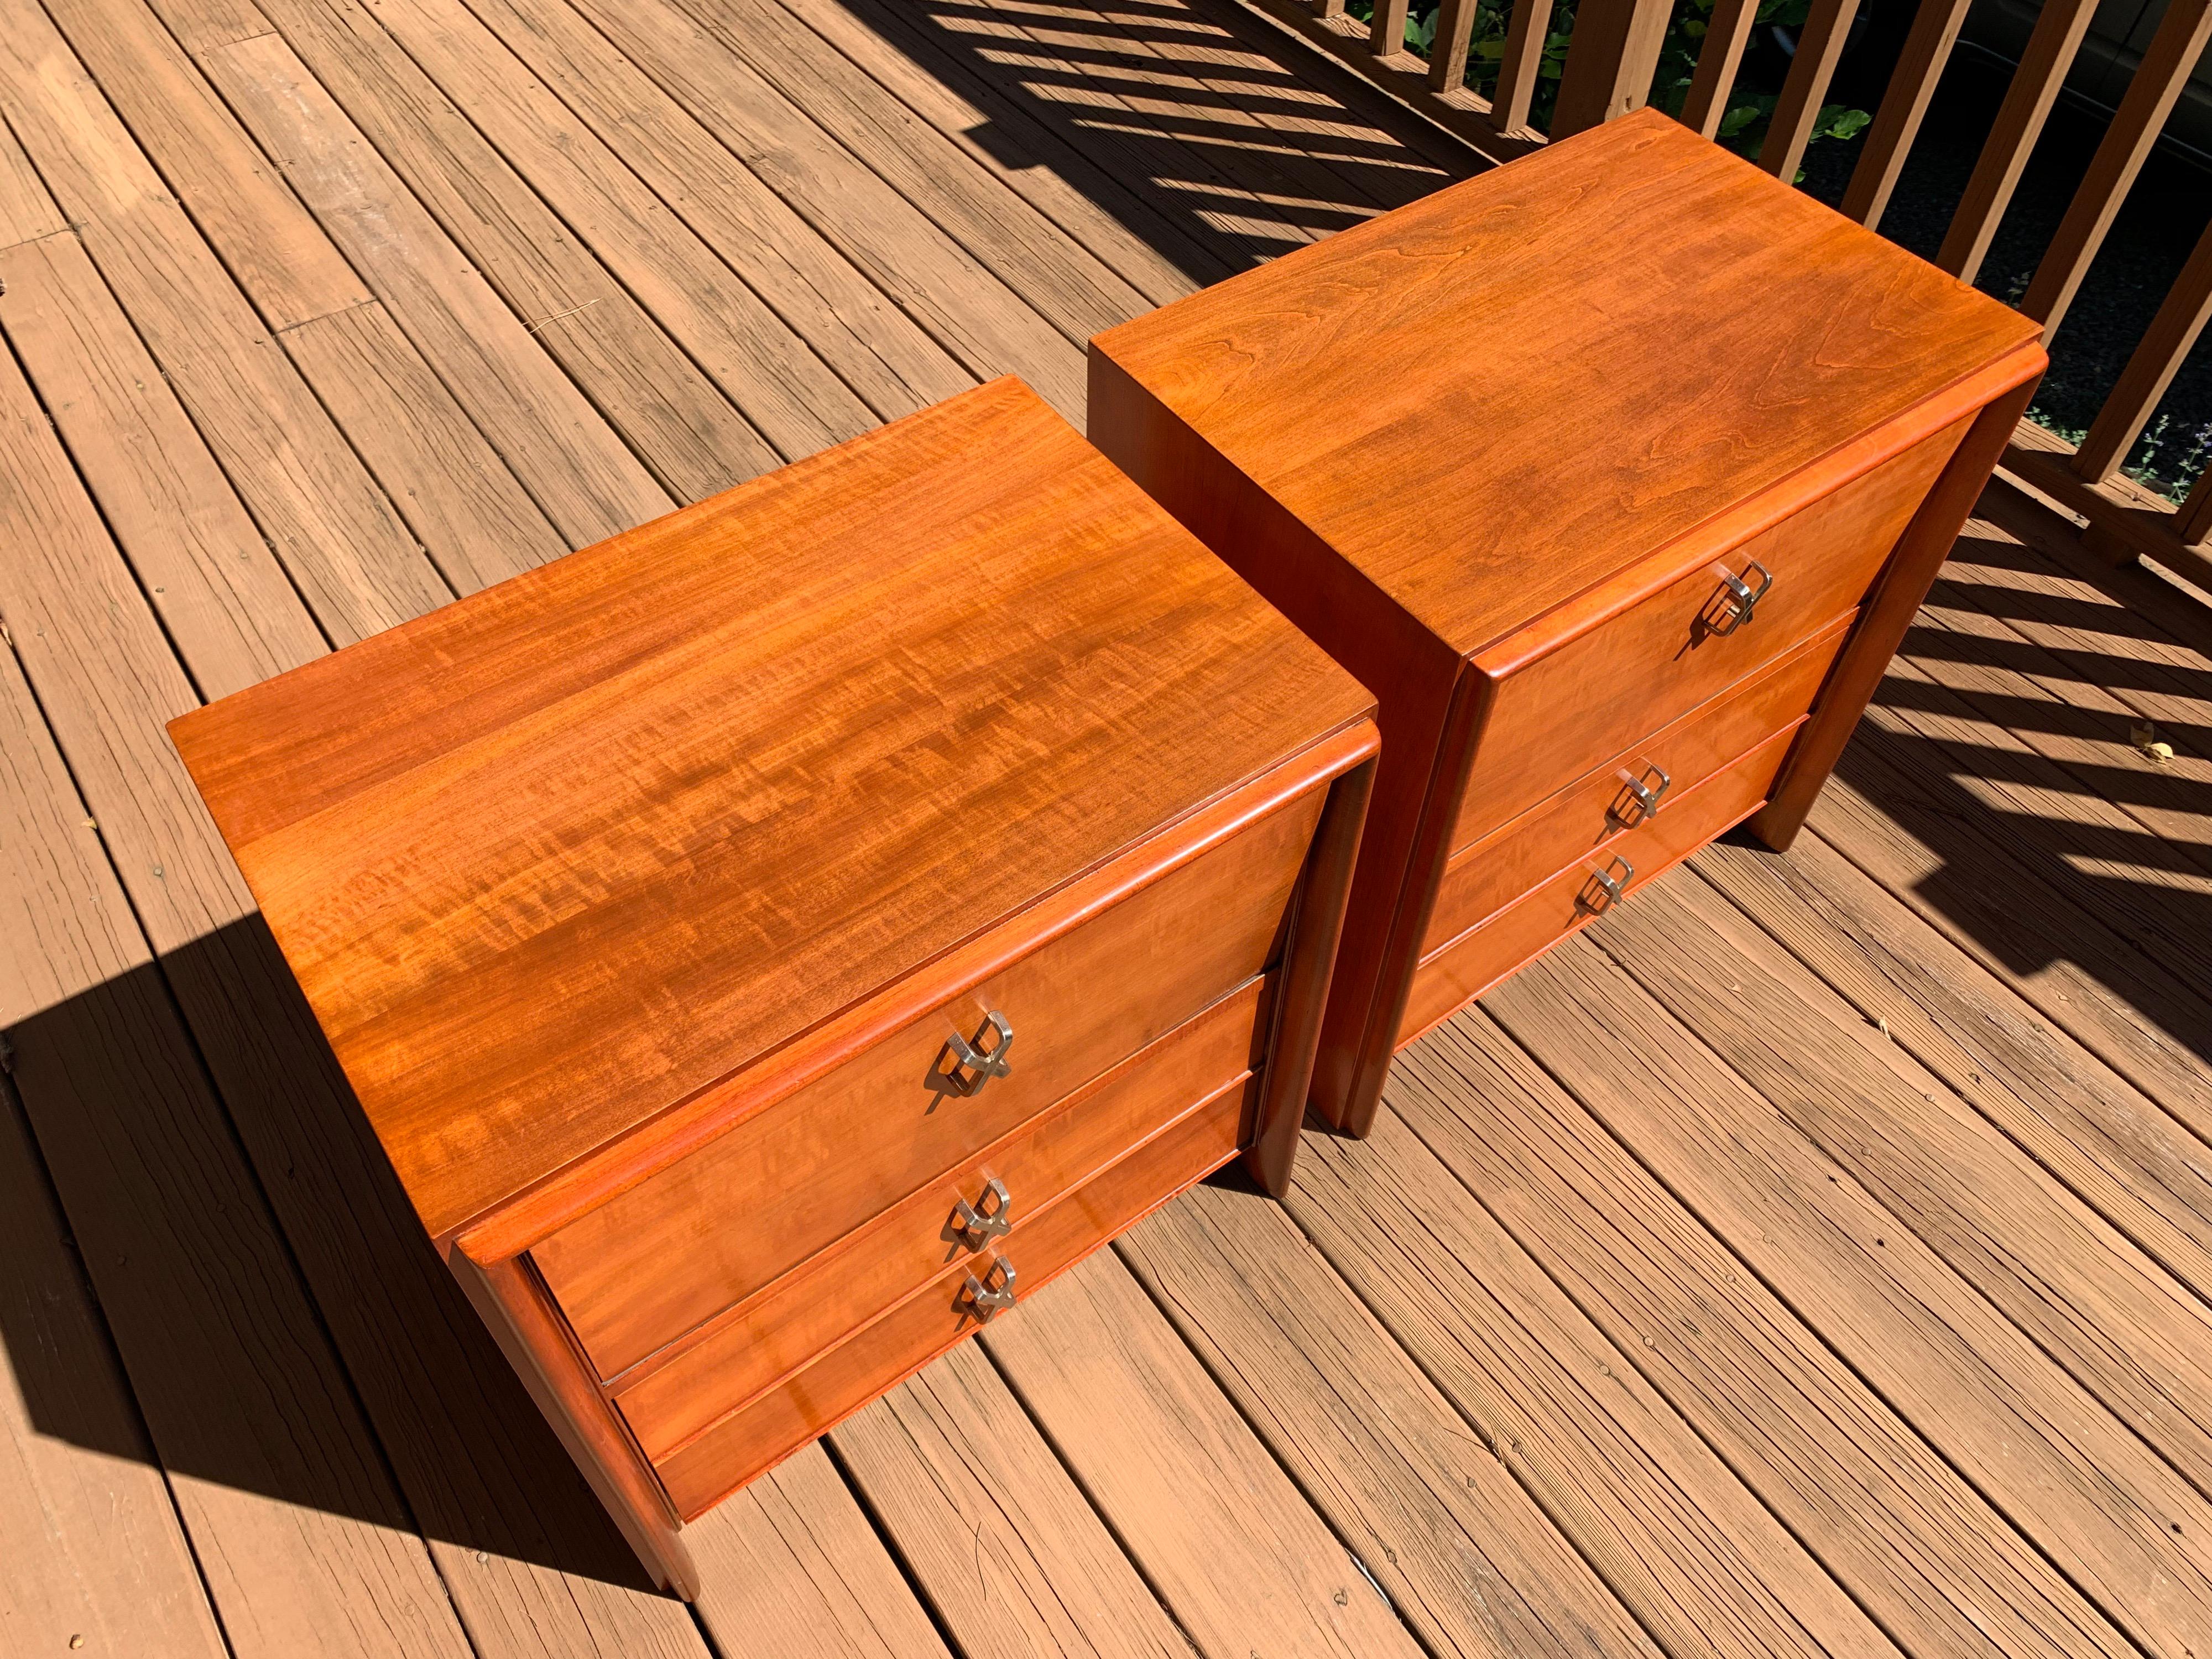 A beautiful pair of cherry wood nightstands designed by Paul Frankl for Johnson Furniture company having nickel X-pulls and signature flip down doors, circa 1955.